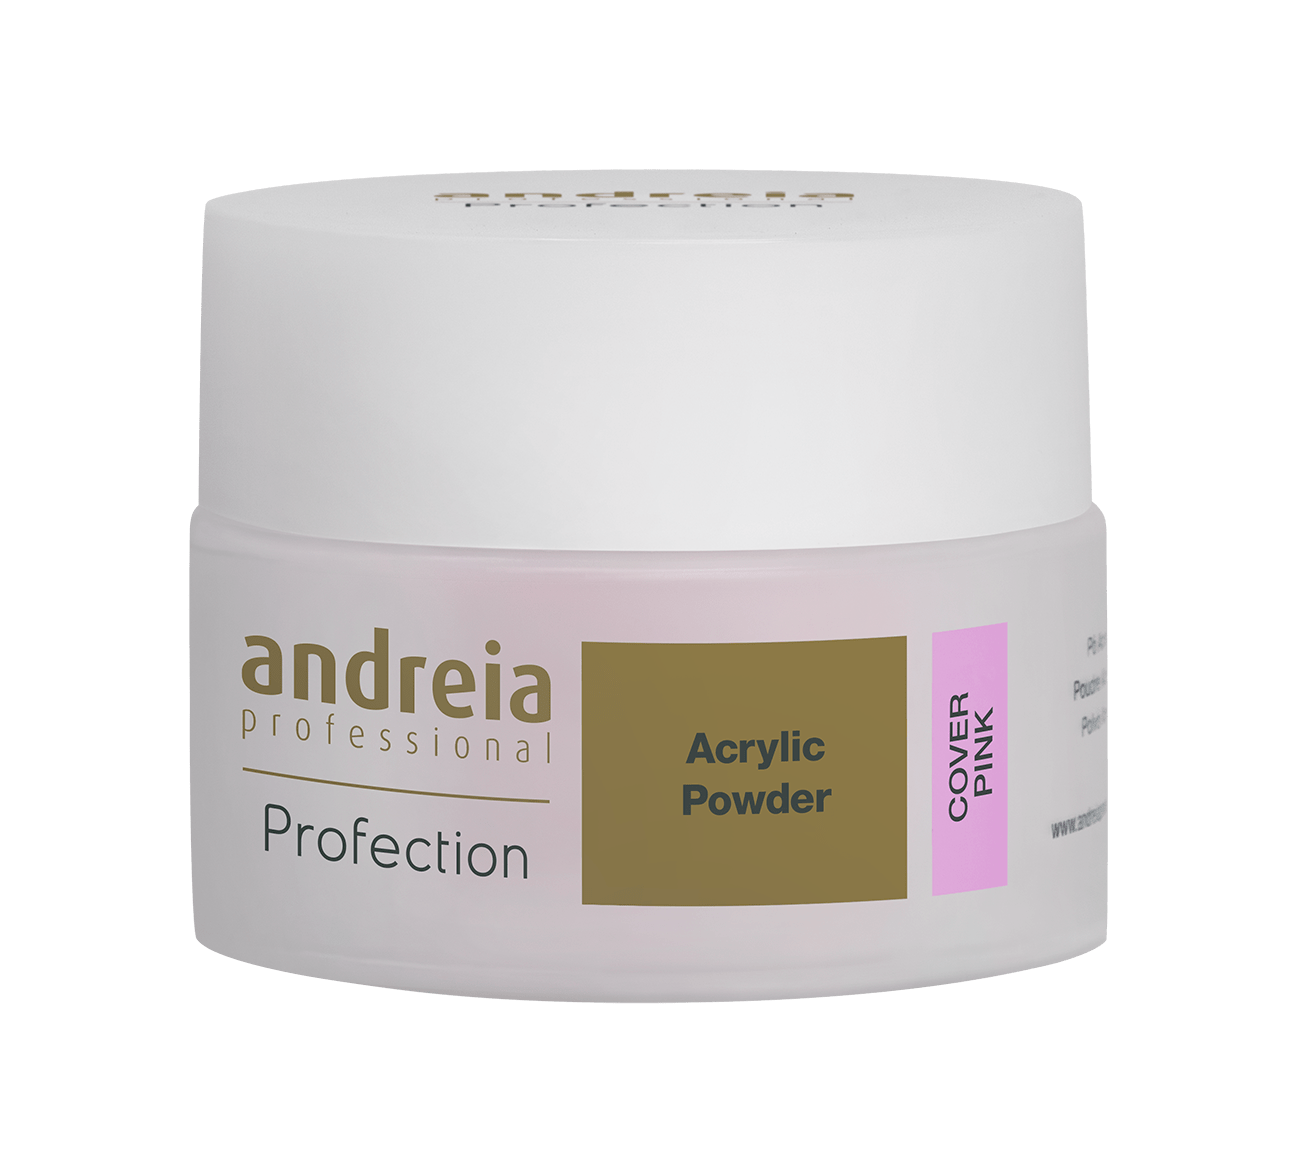 Andreia Professional Profection Acrylic Powder Cover Pink 35g